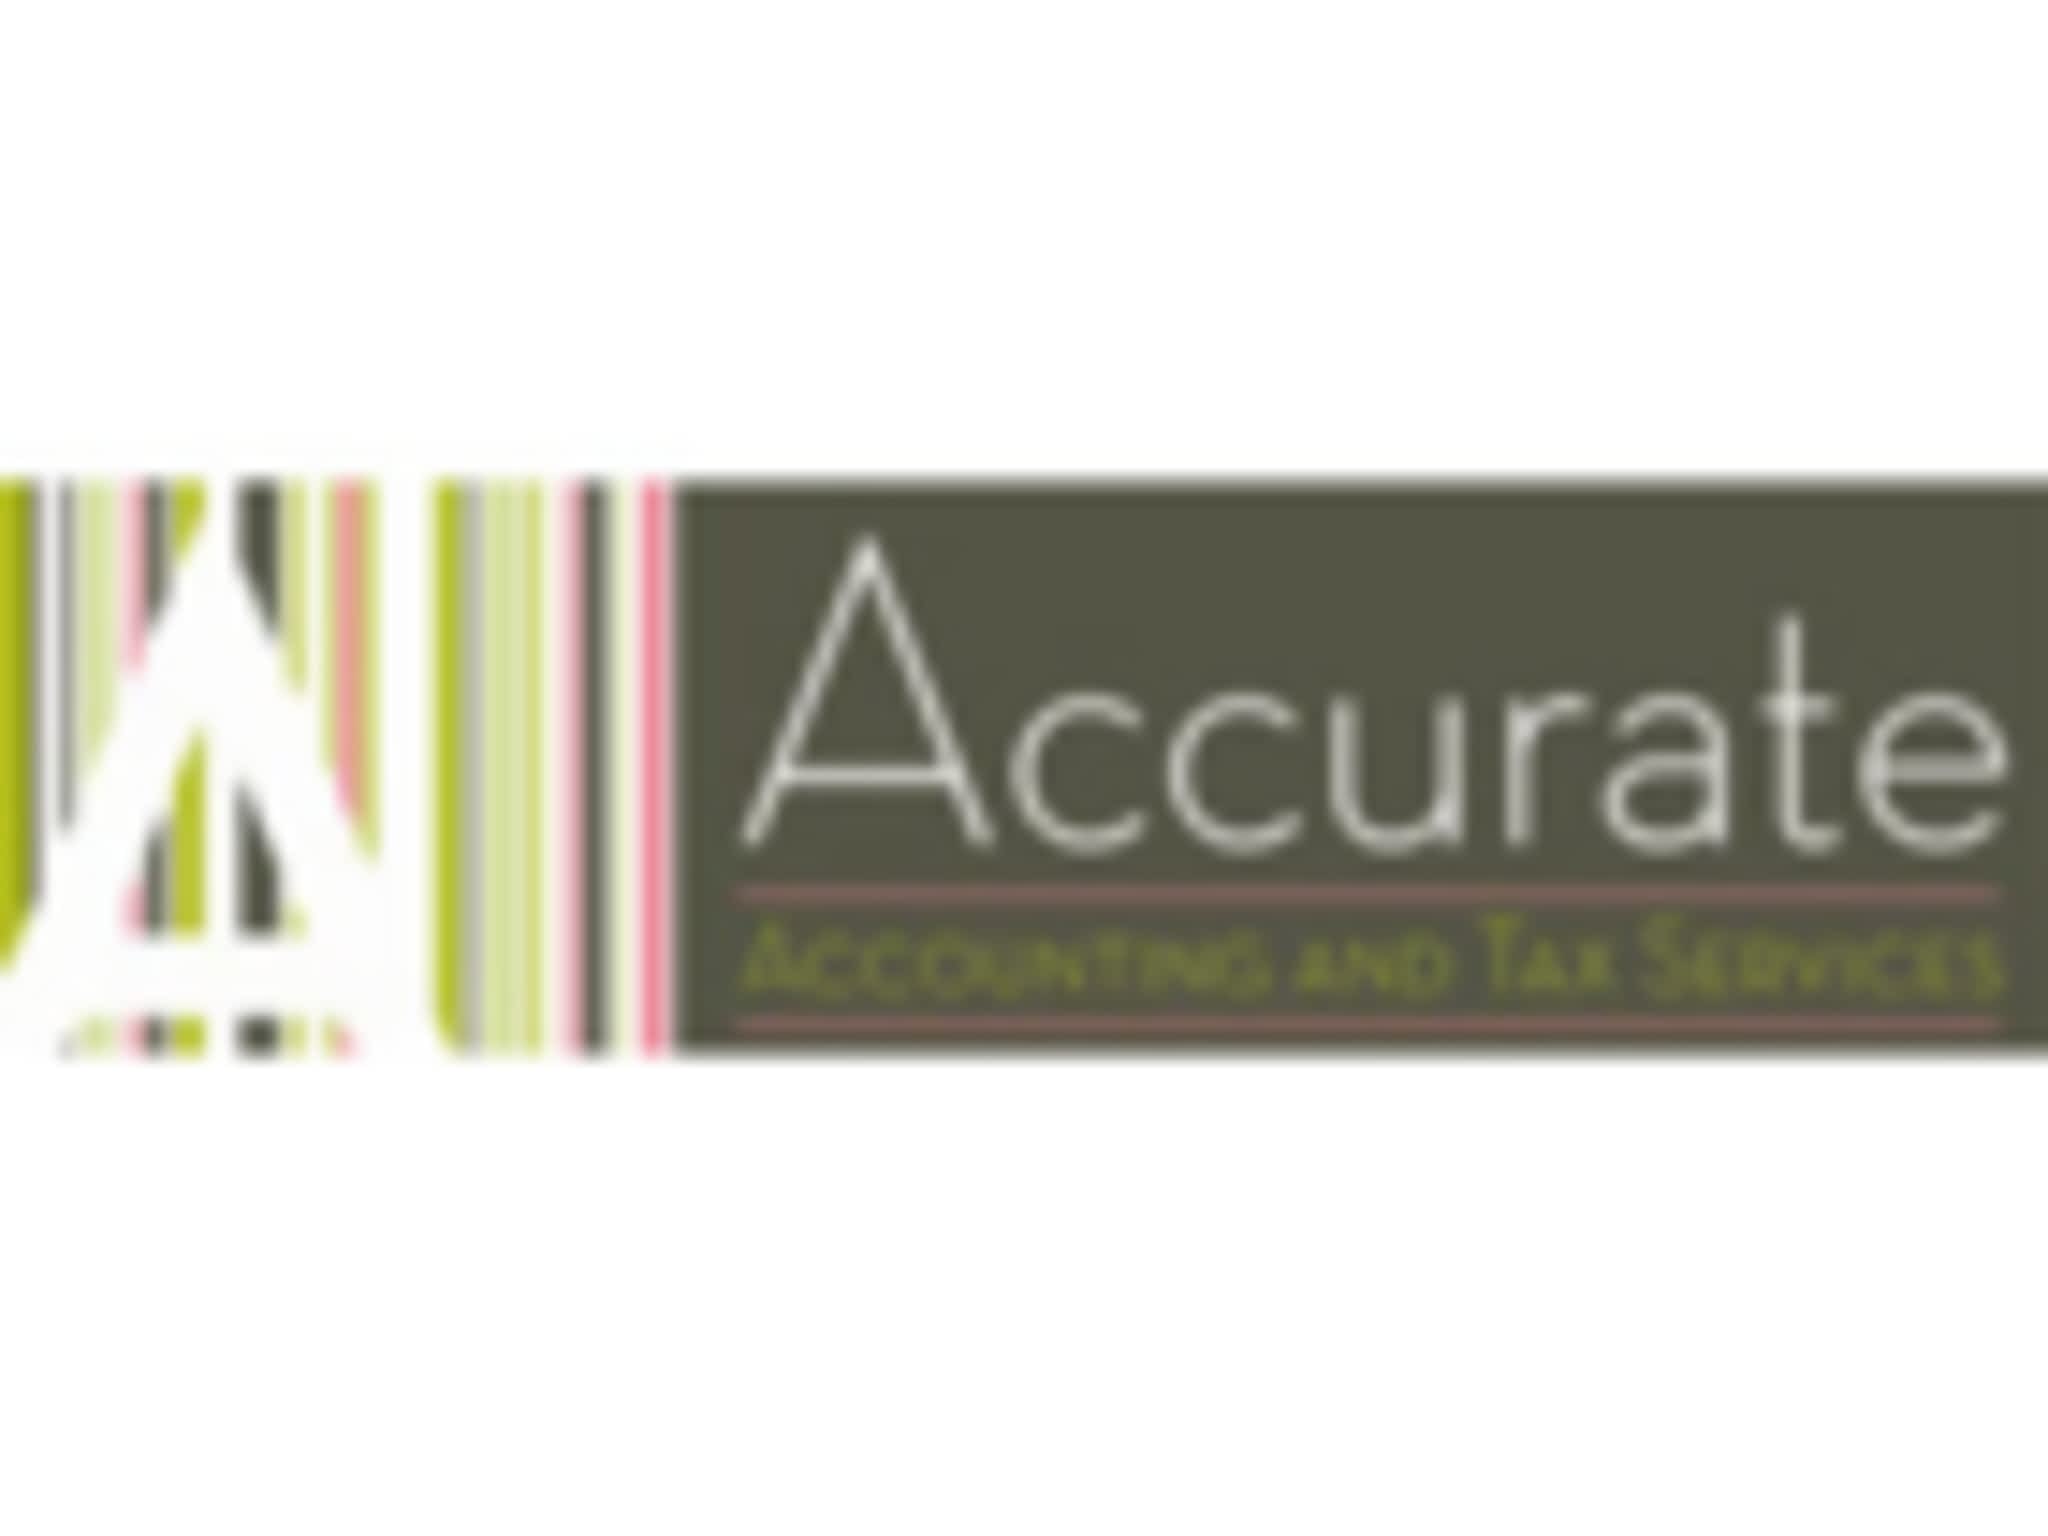 photo Accurate Accounting & Tax Service